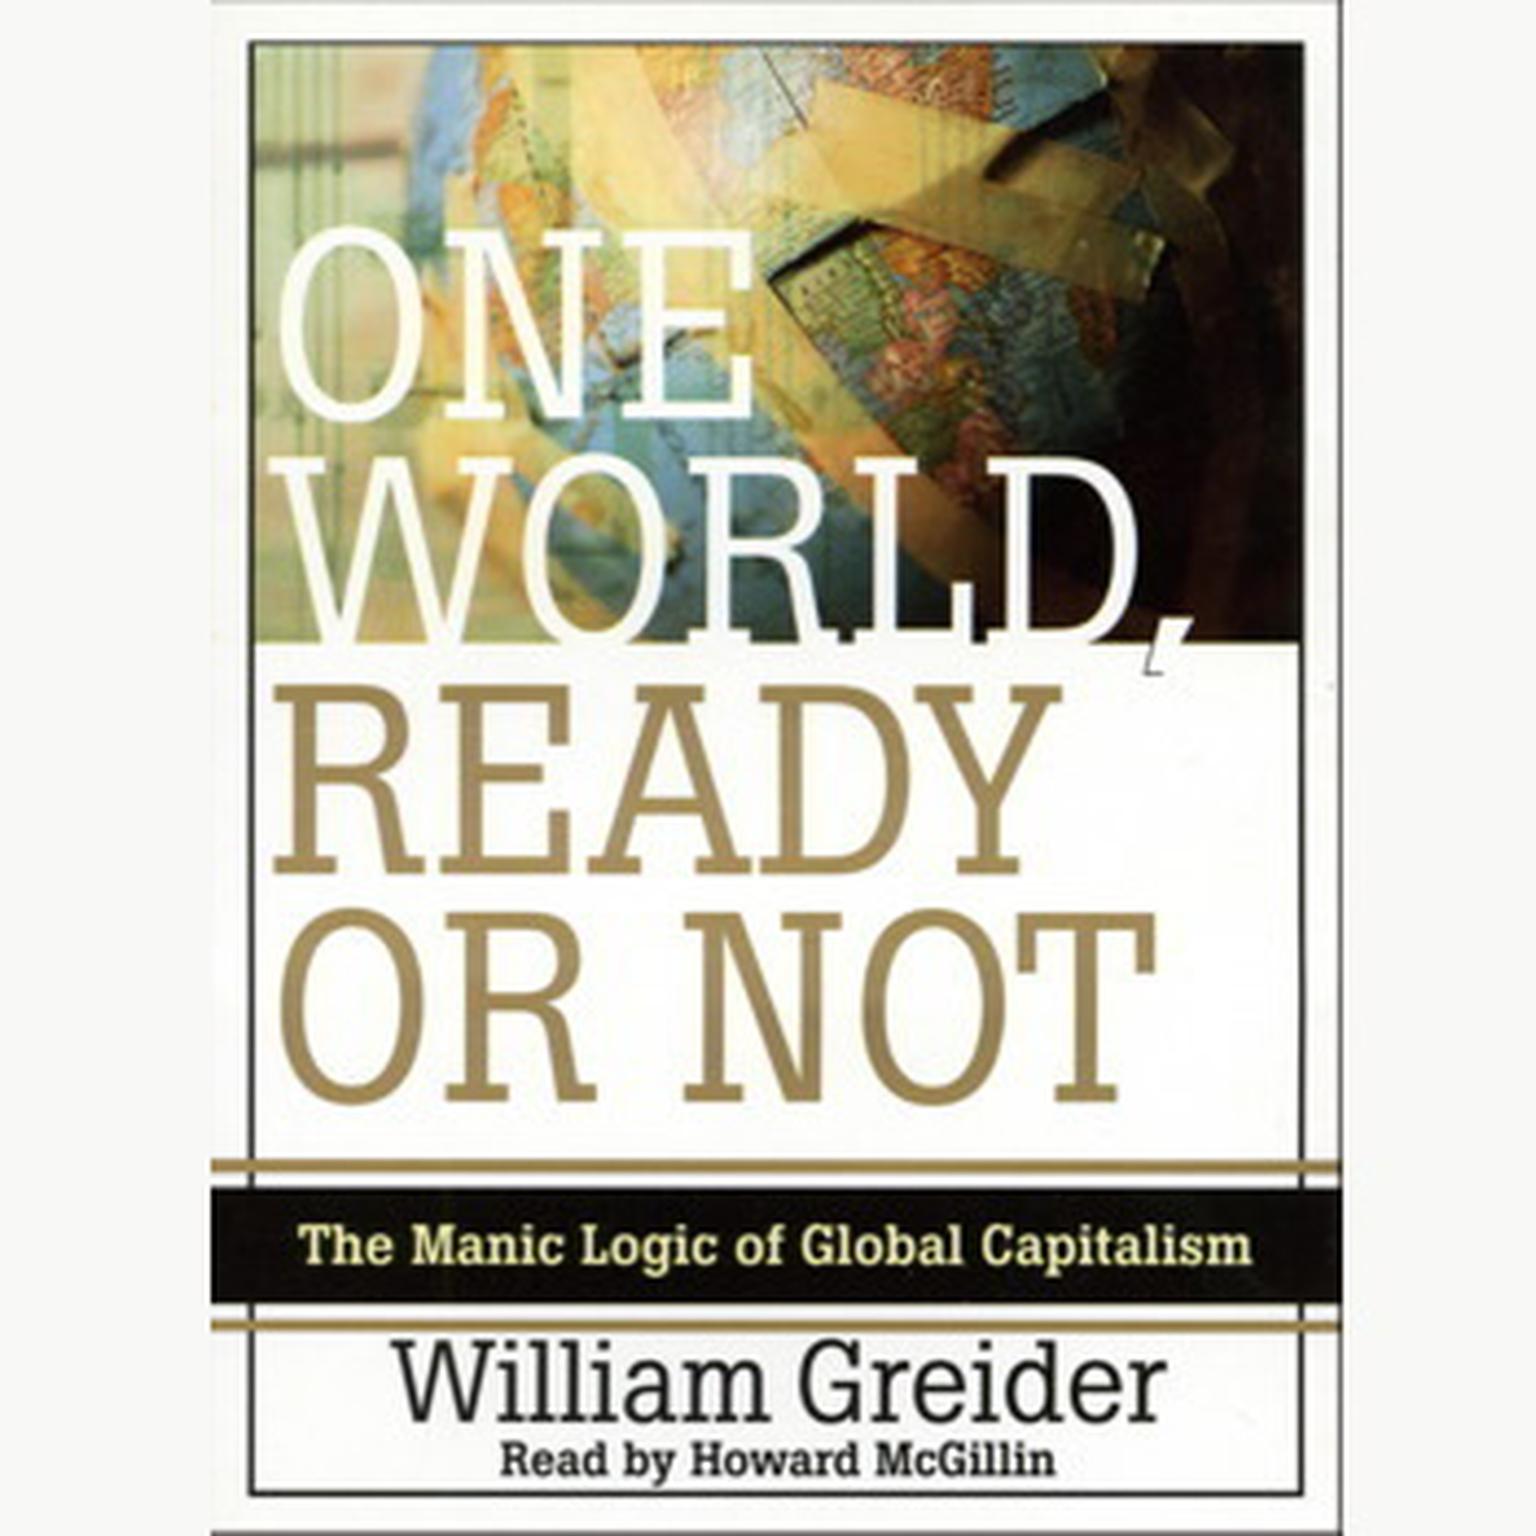 One World, Ready or Not (Abridged): The Manic Logic of Global Capitalism Audiobook, by William Greider